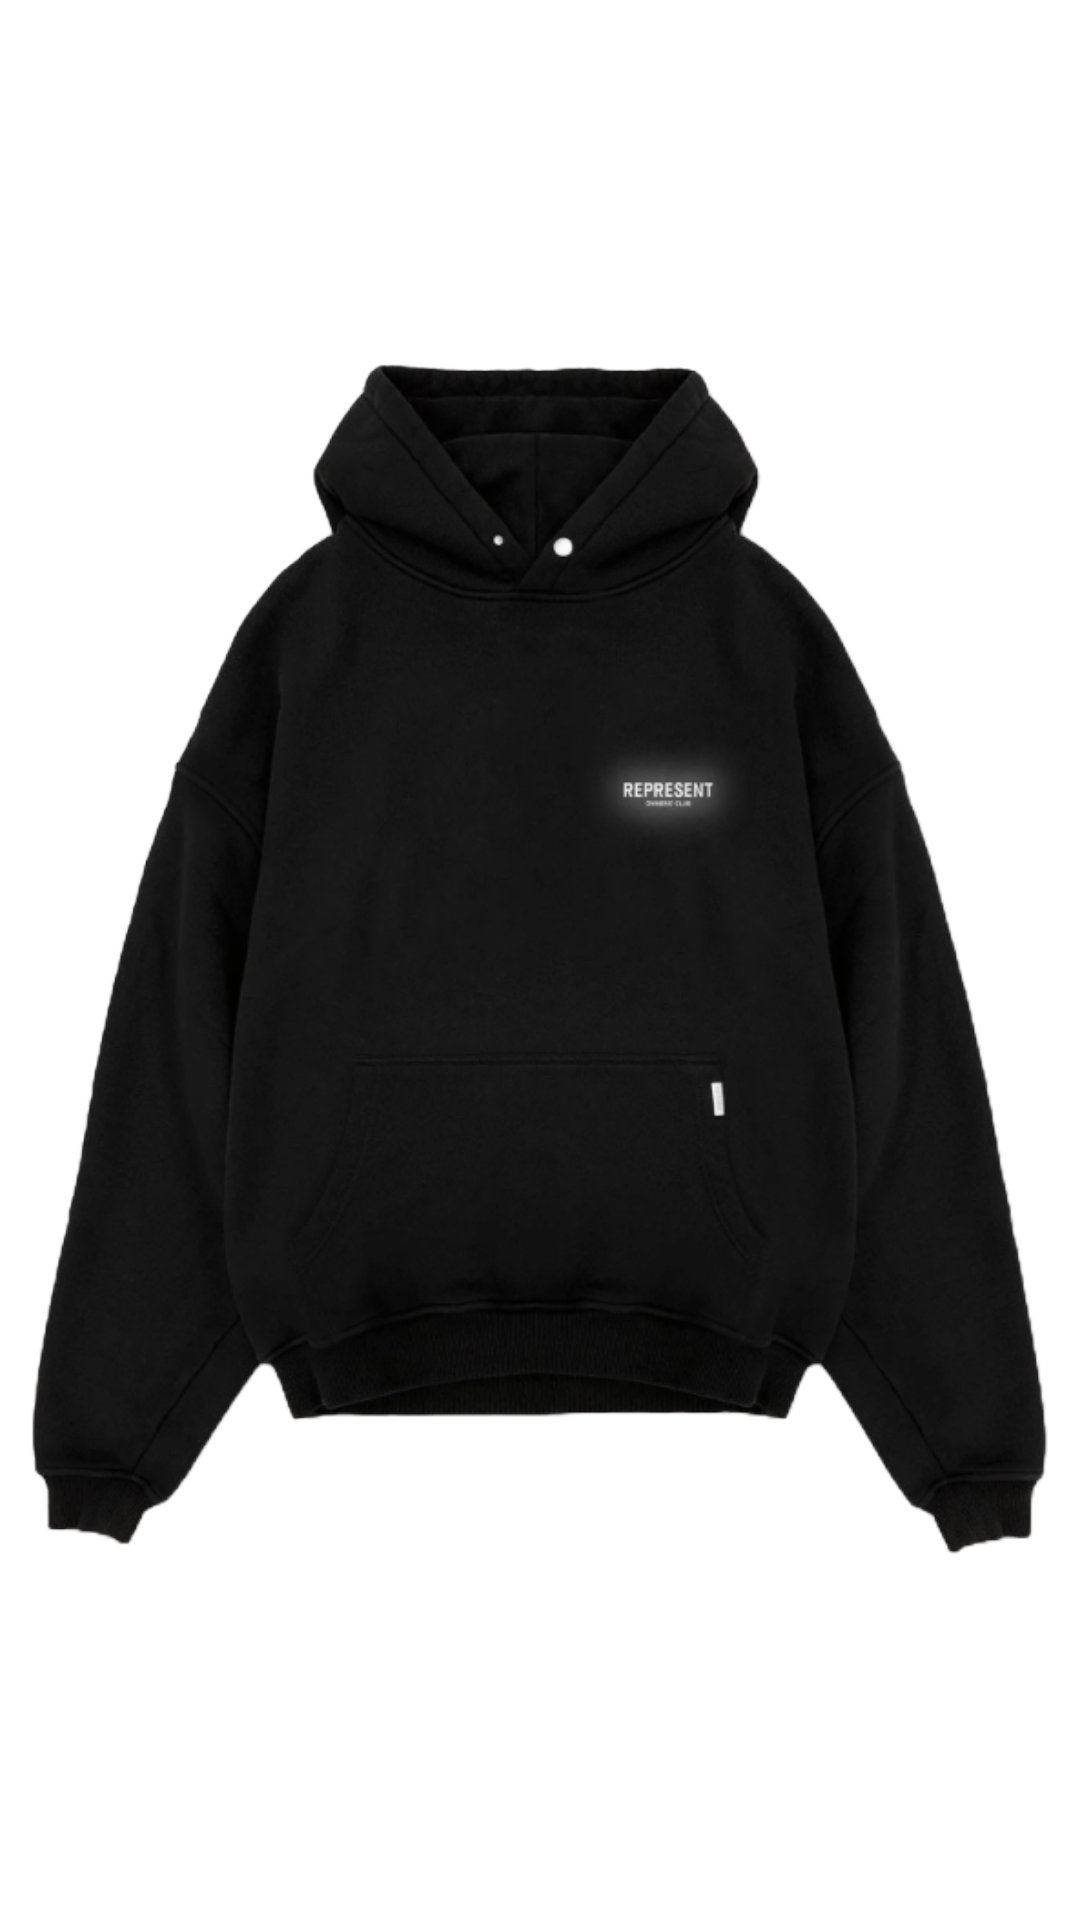 REPRESENT OWNERS CLUB HOODIE - BLACK REFLECTIVE